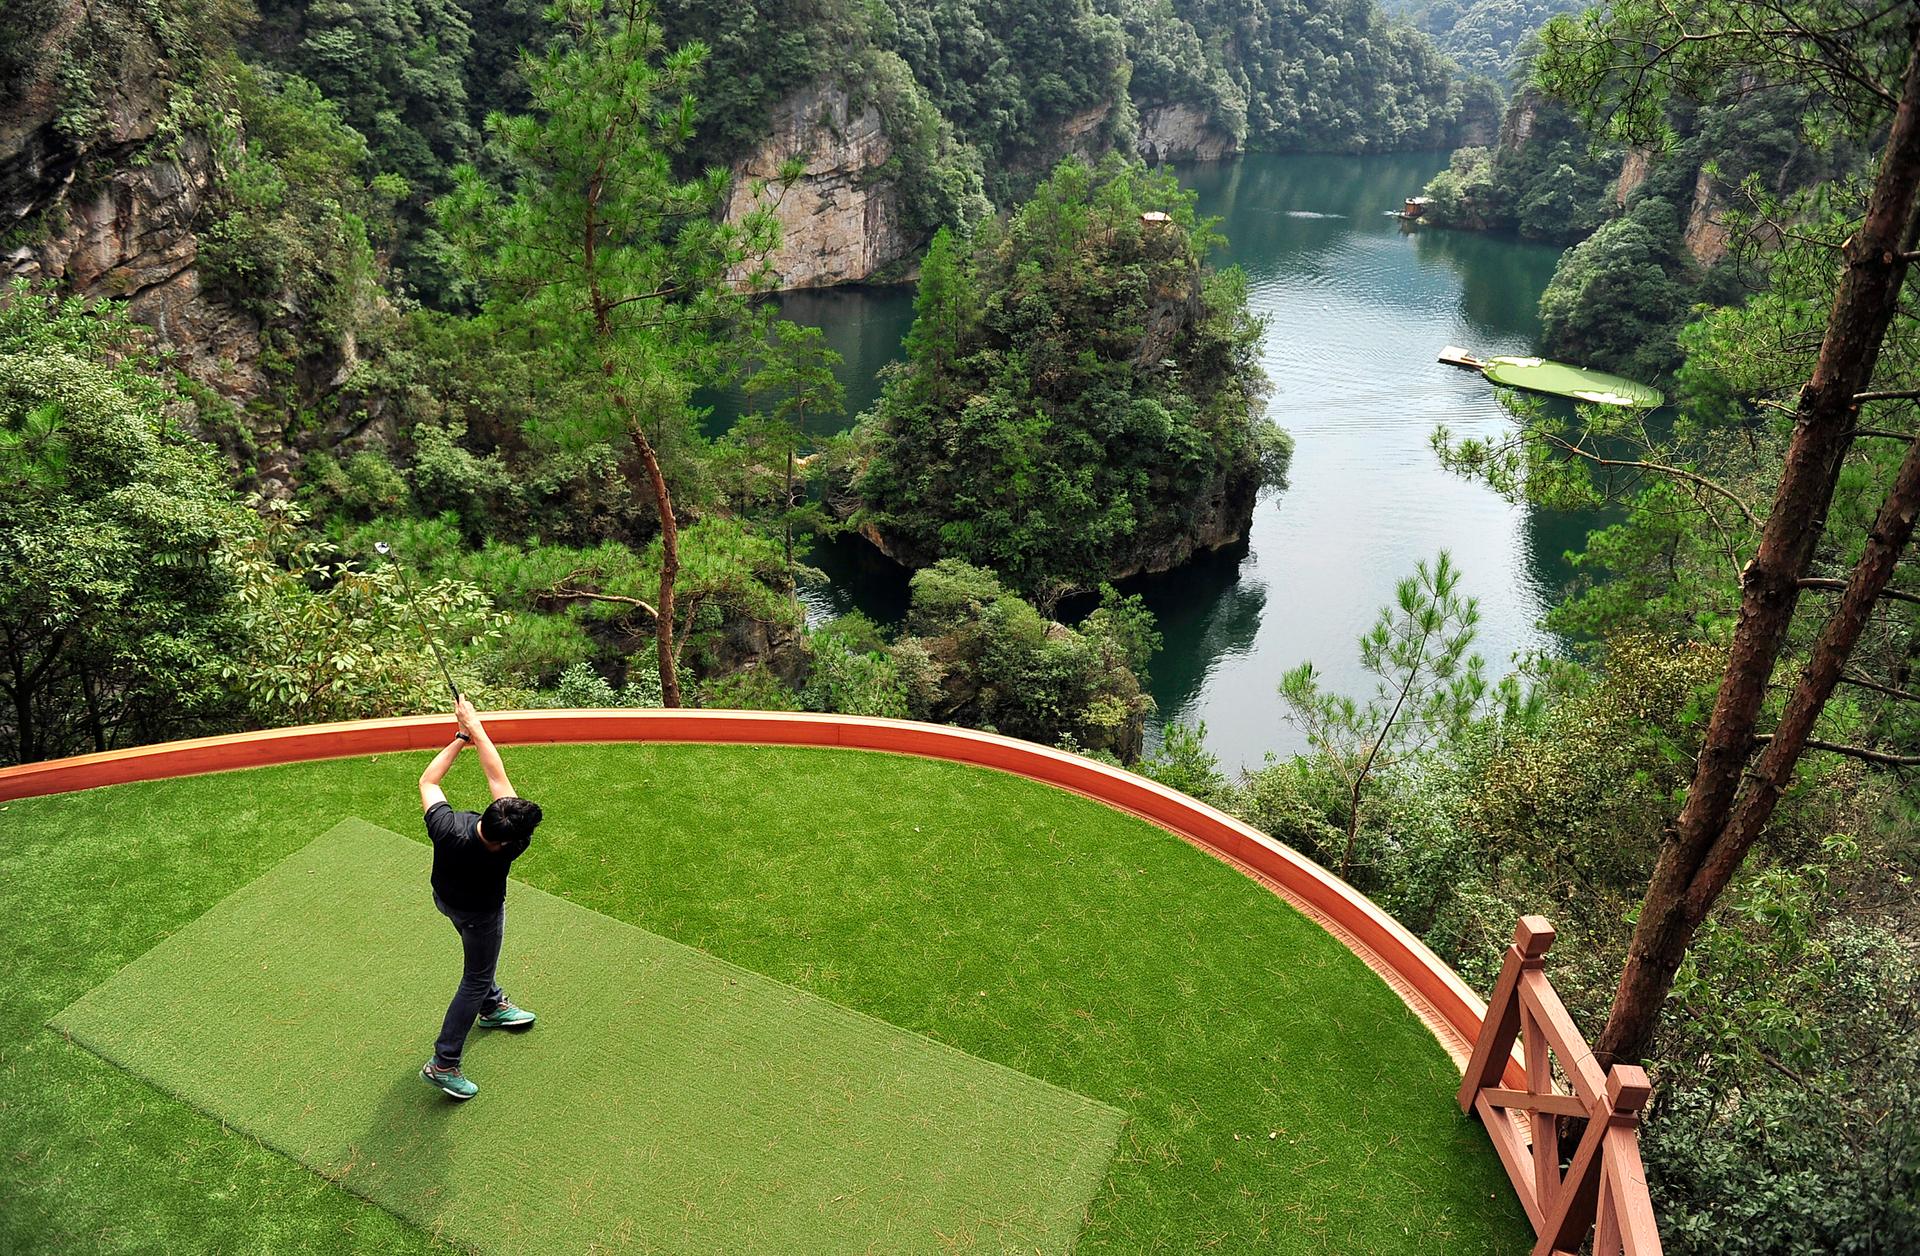 A staff member plays a shot towards a putting green on a lake from a tee ground on top of a hill, at Zhangjiajie, Hunan province September 23, 2014.